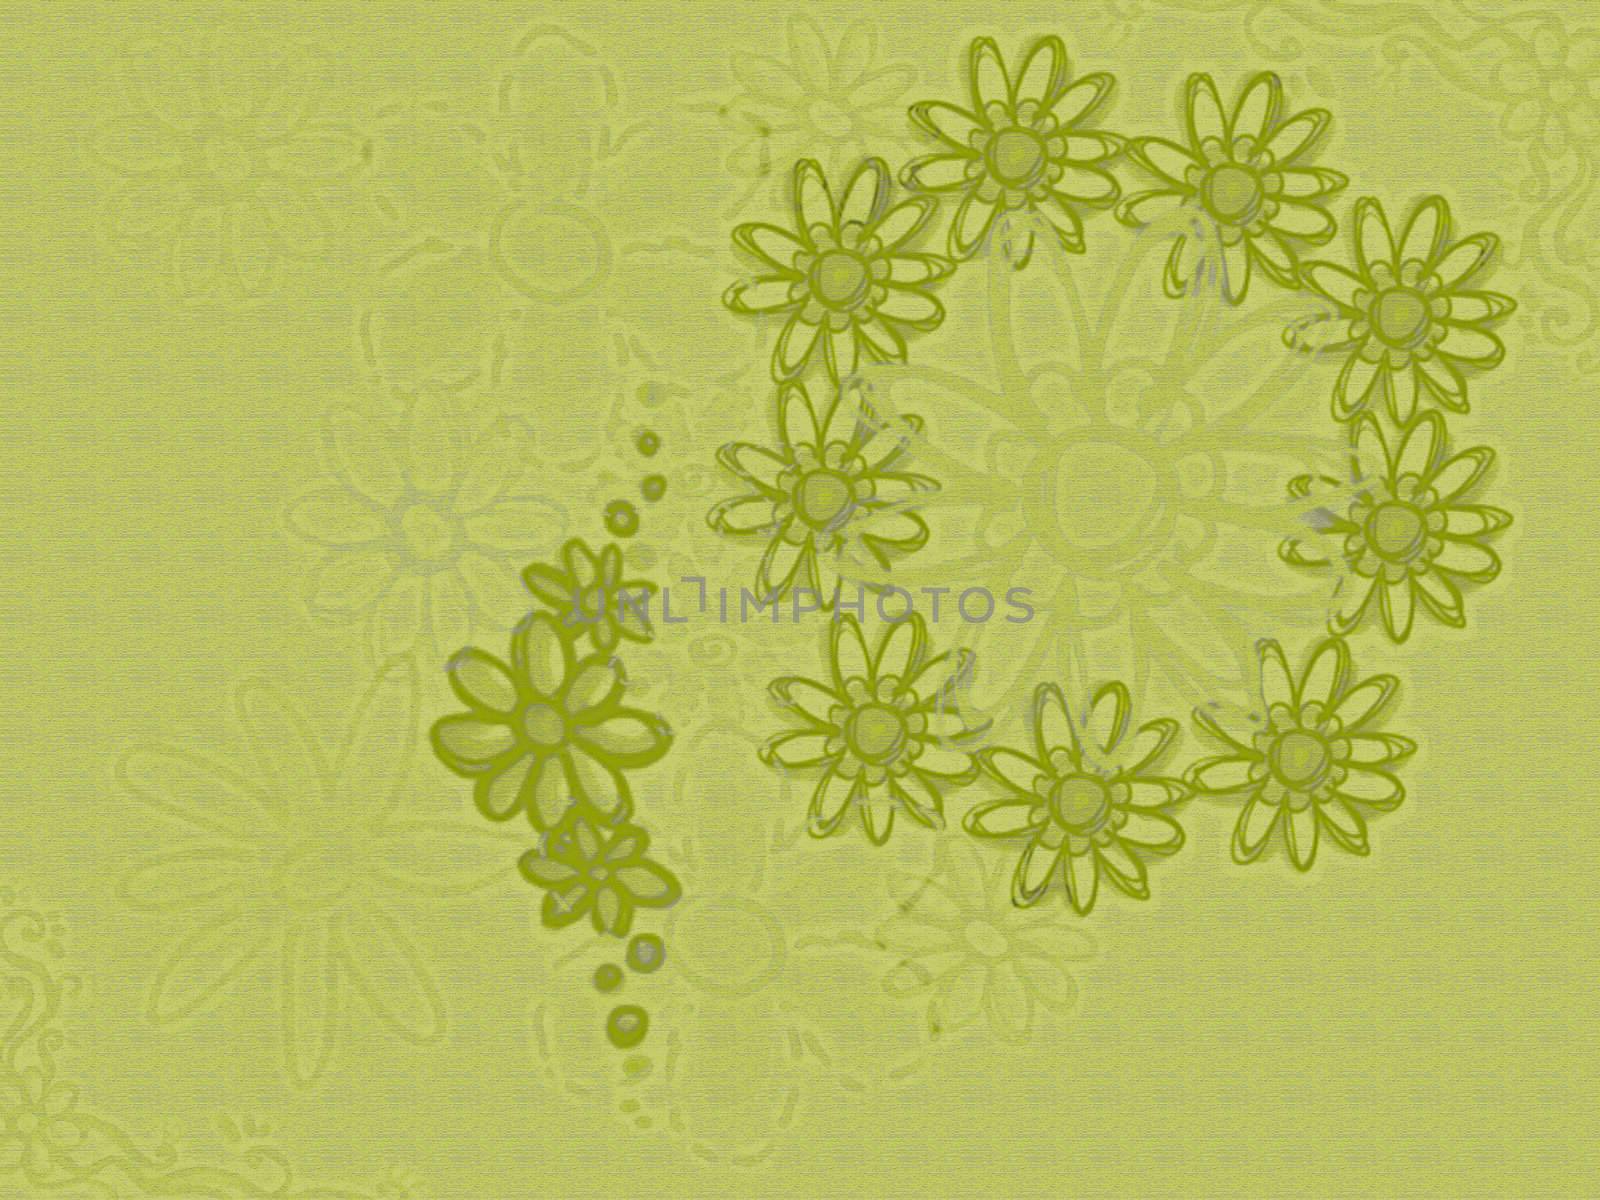 Muted Green Flower Frame on Green Paper by bobbigmac